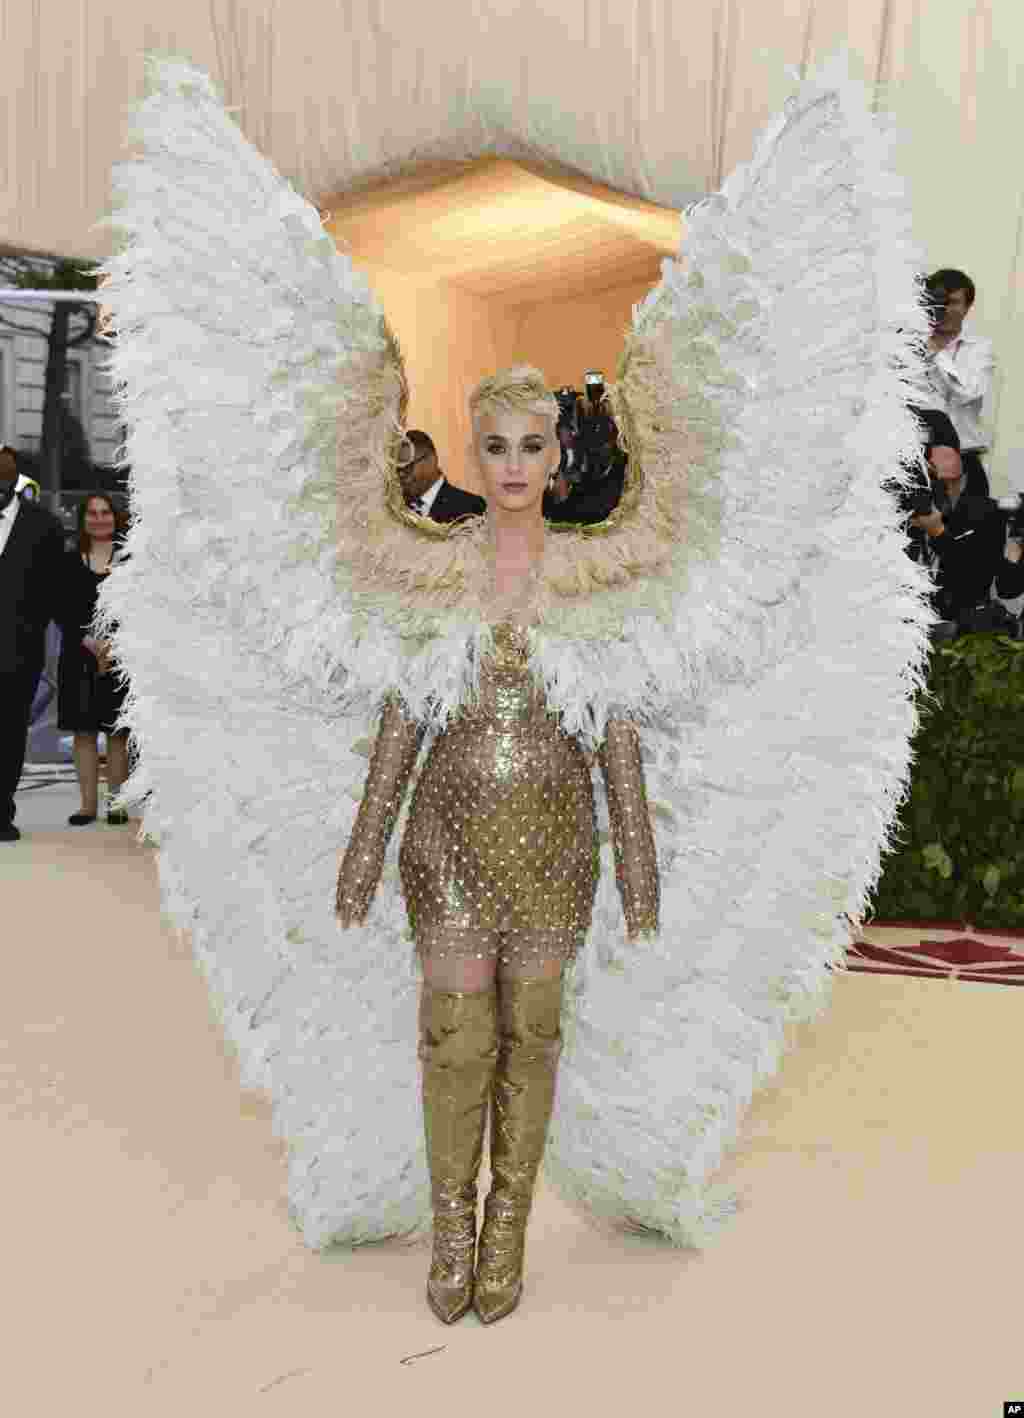 Singer Katy Perry attends The Metropolitan Museum of Art&#39;s Costume Institute benefit gala celebrating the opening of the Heavenly Bodies: Fashion and the Catholic Imagination exhibit on Monday, May 7, 2018, in New York. (Photo by Charles Sykes/Invision/AP)